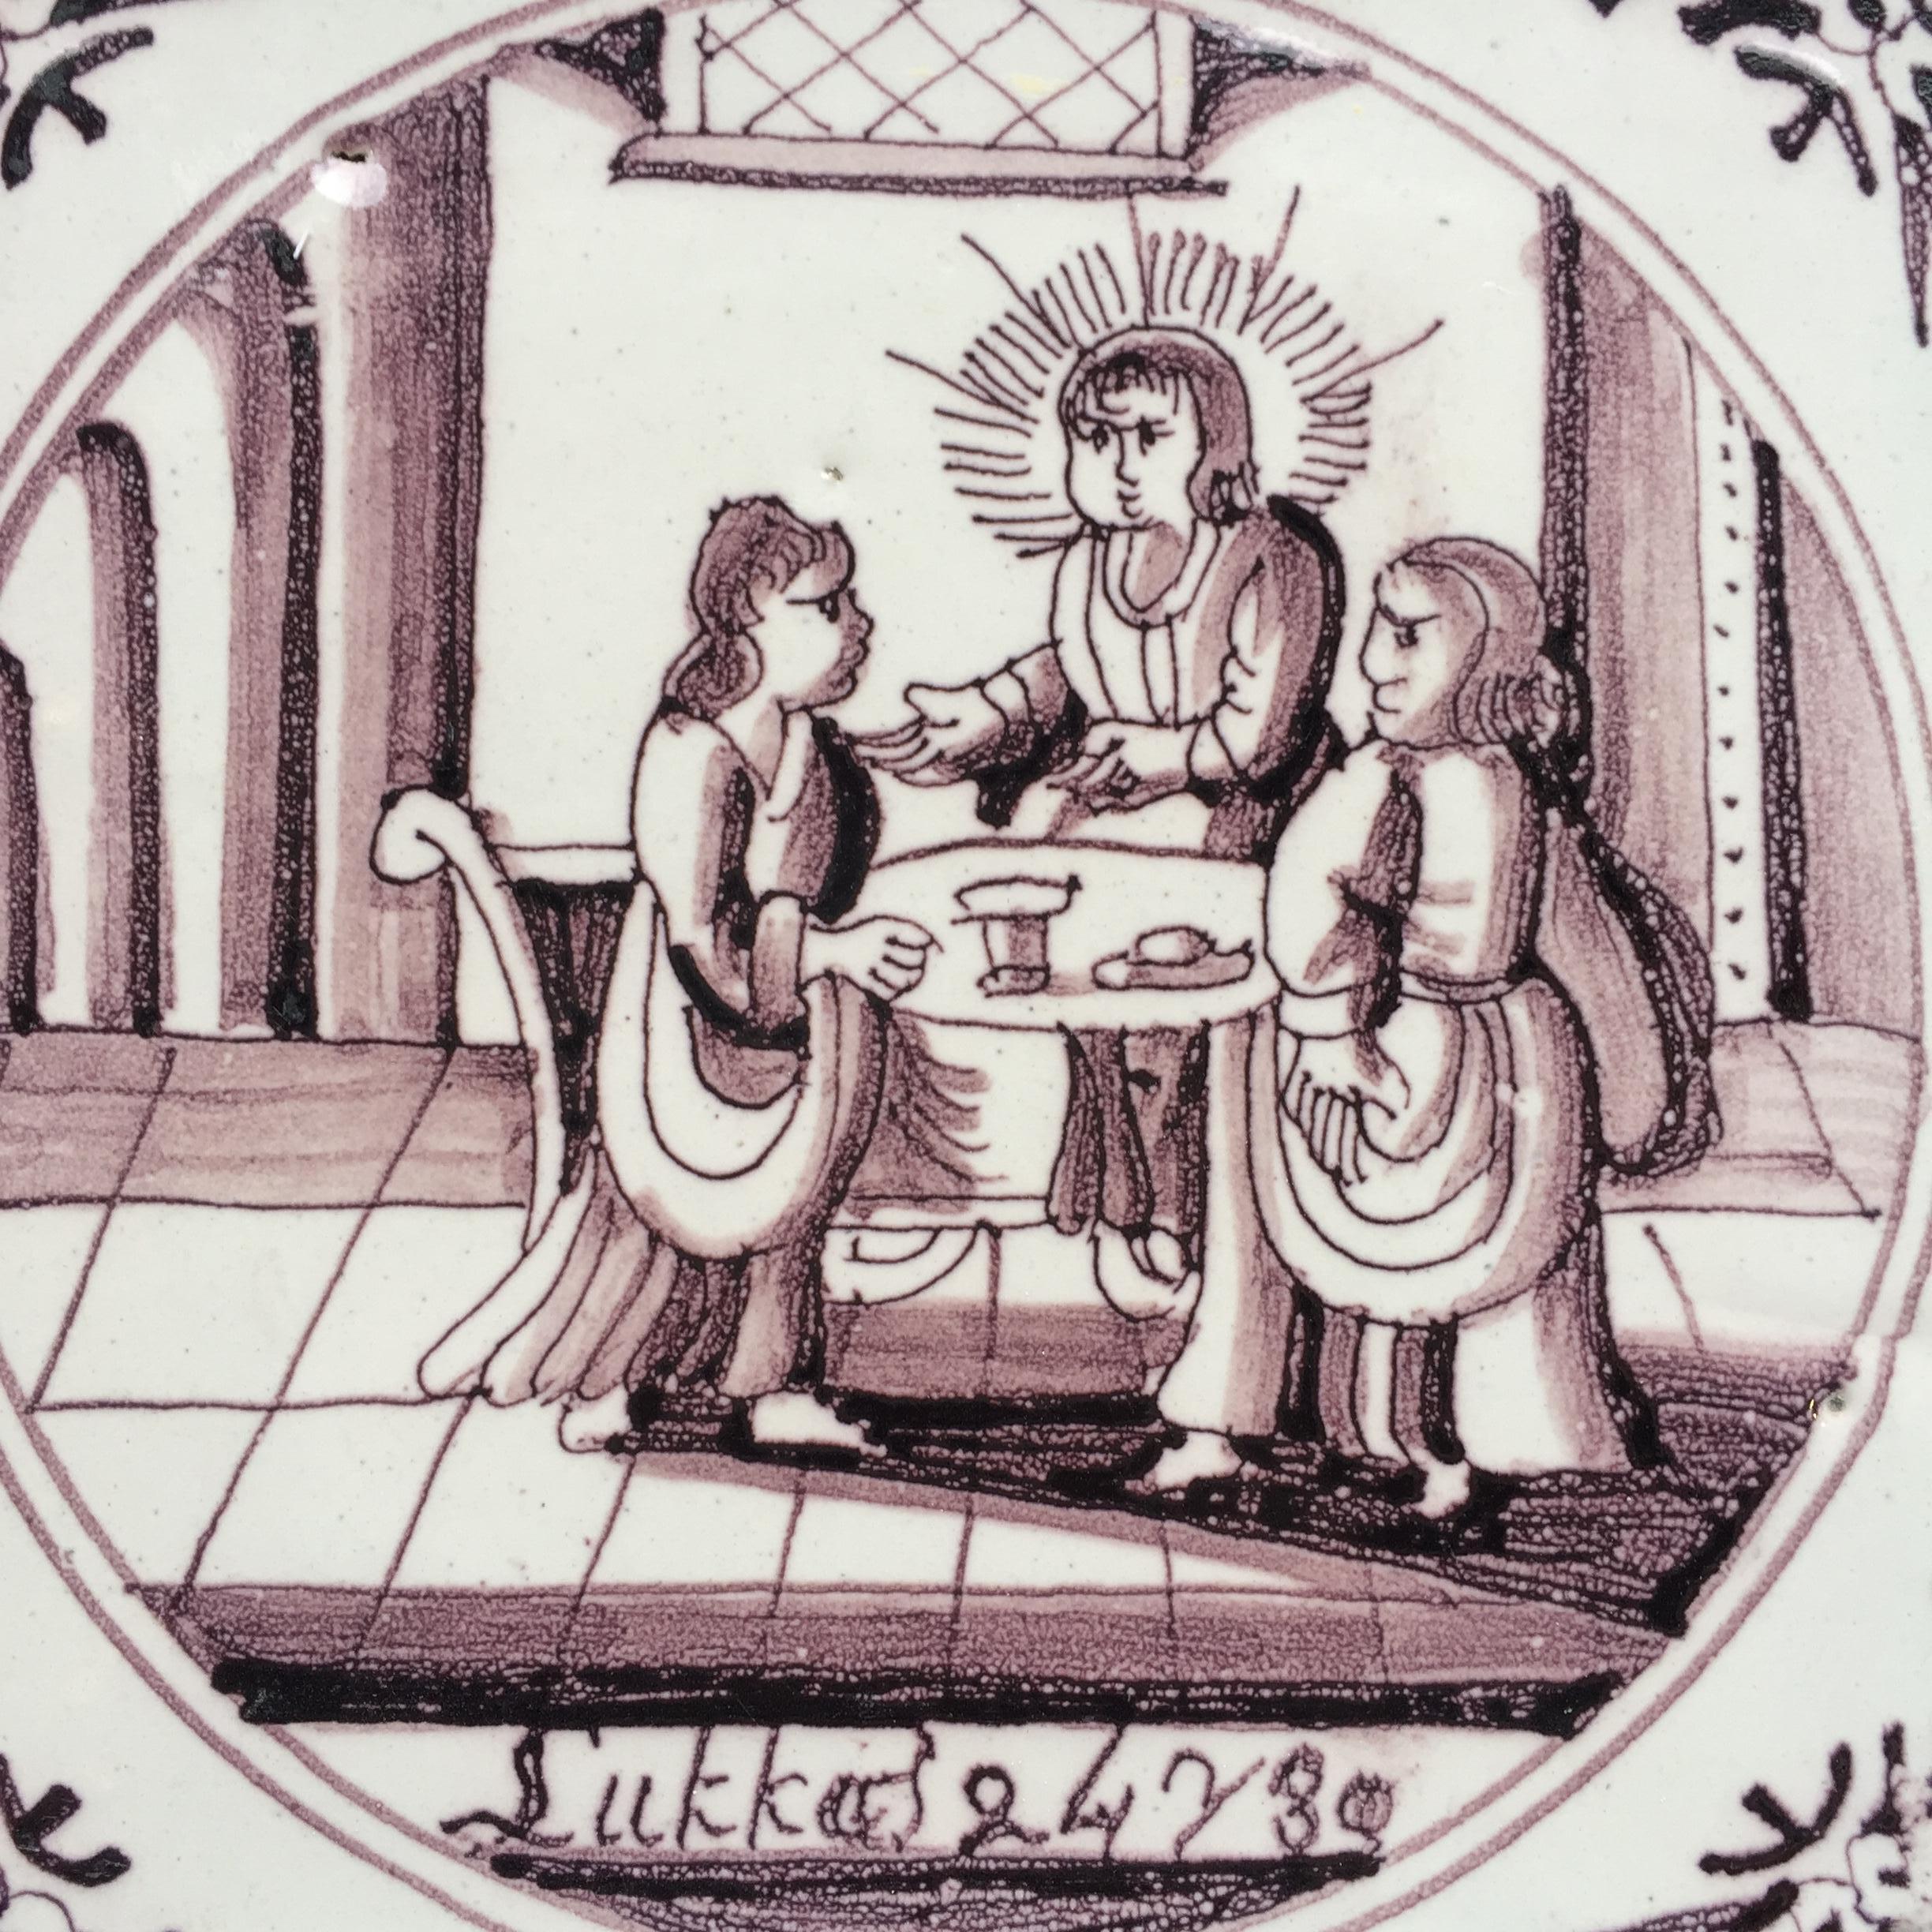 The Netherlands
Rotterdam
Circa 1725 – 1775

A fine manganese Dutch tile with a New Testament biblical decoration of the Supper at Emmaus, Luke 24 v 30: ”When he was at the table with them, he took bread, gave thanks, broke it and began to give it